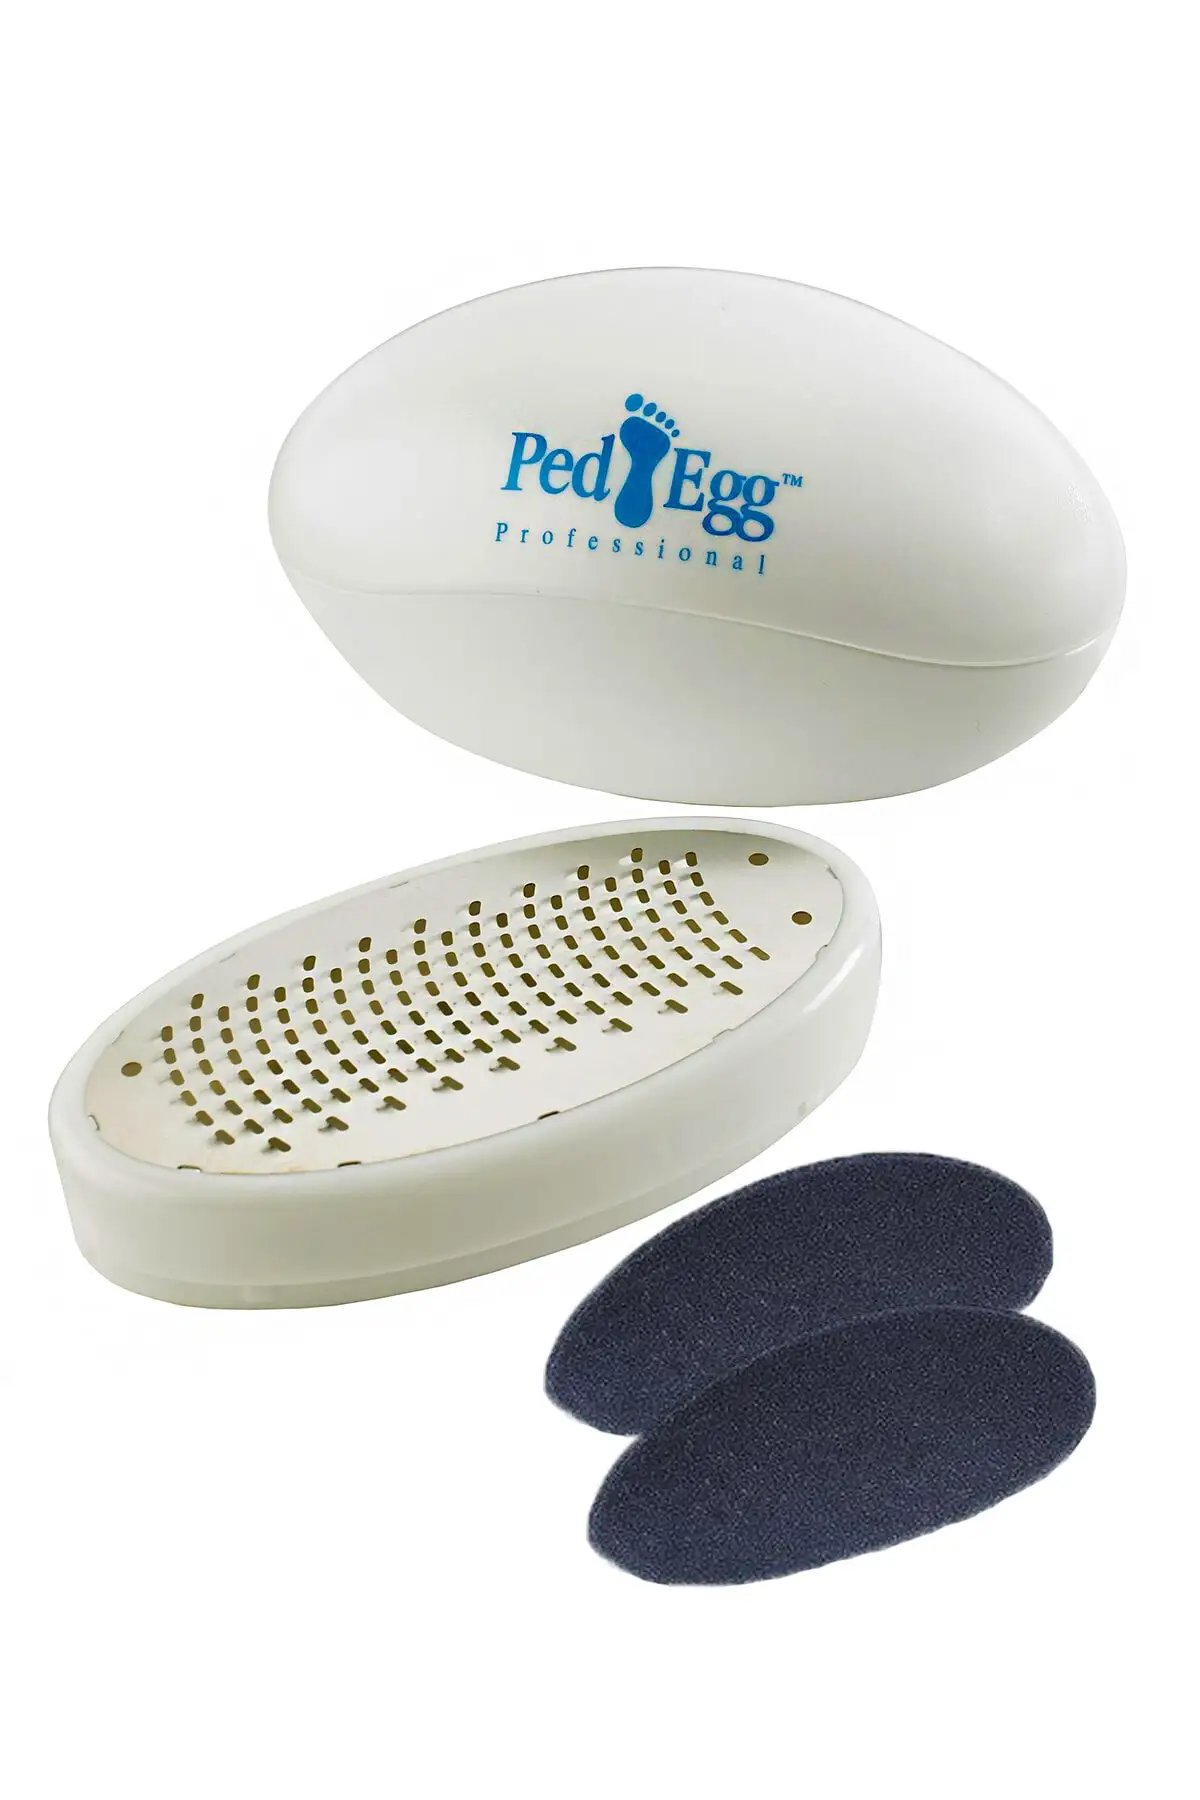 Ped Egg Easy Curve Foot File